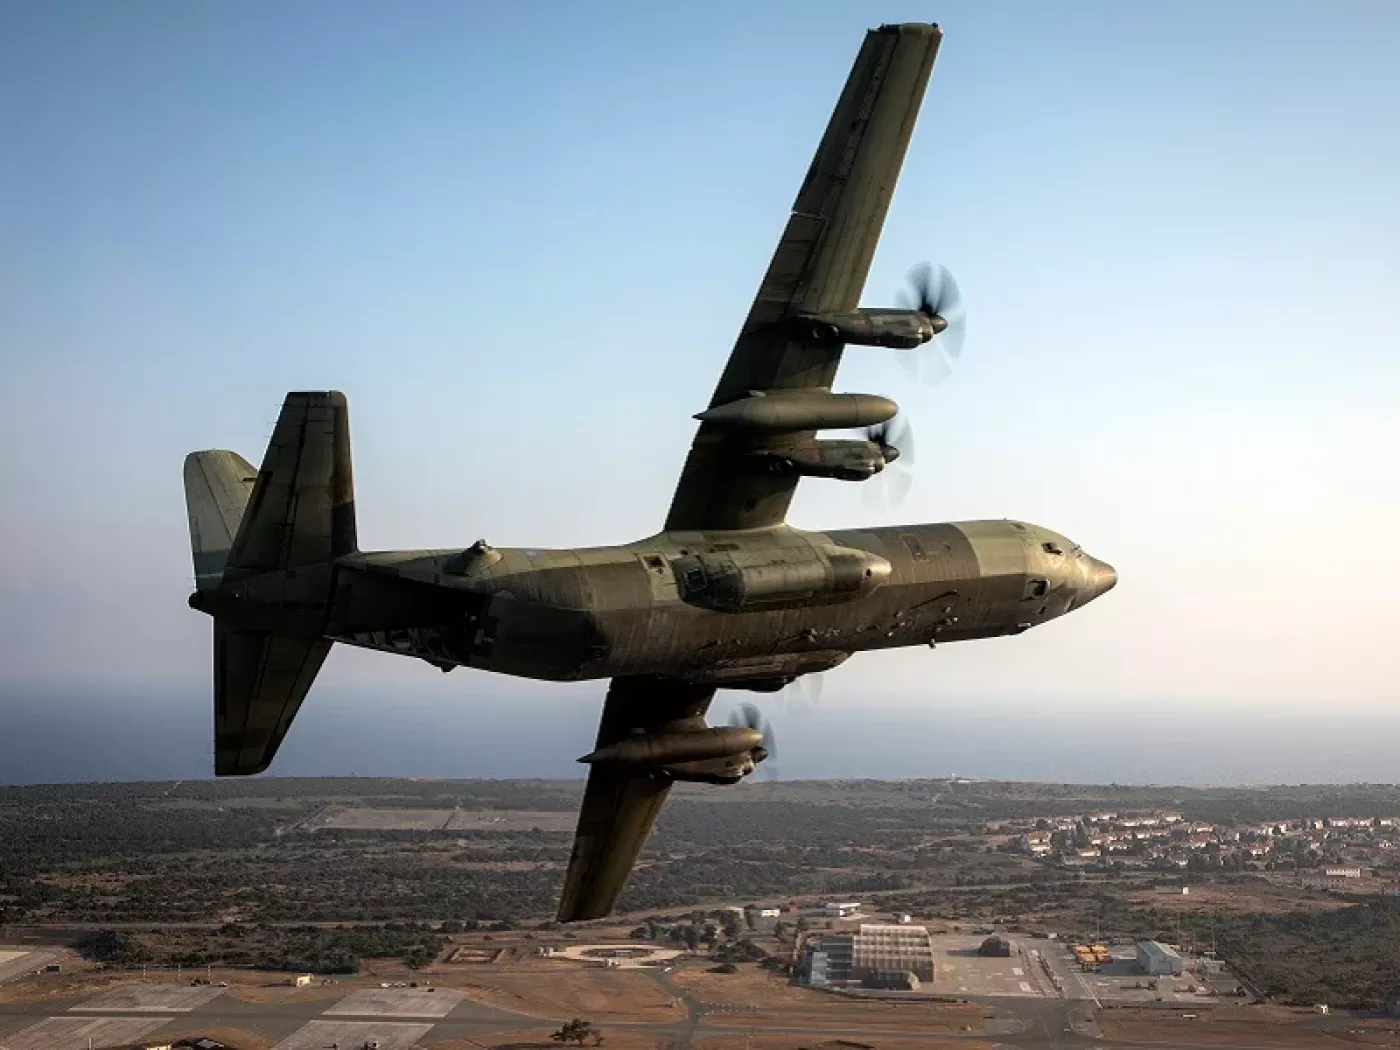 A C-130J Hercules prepares to land after a successful training mission. (Royal Air Force)